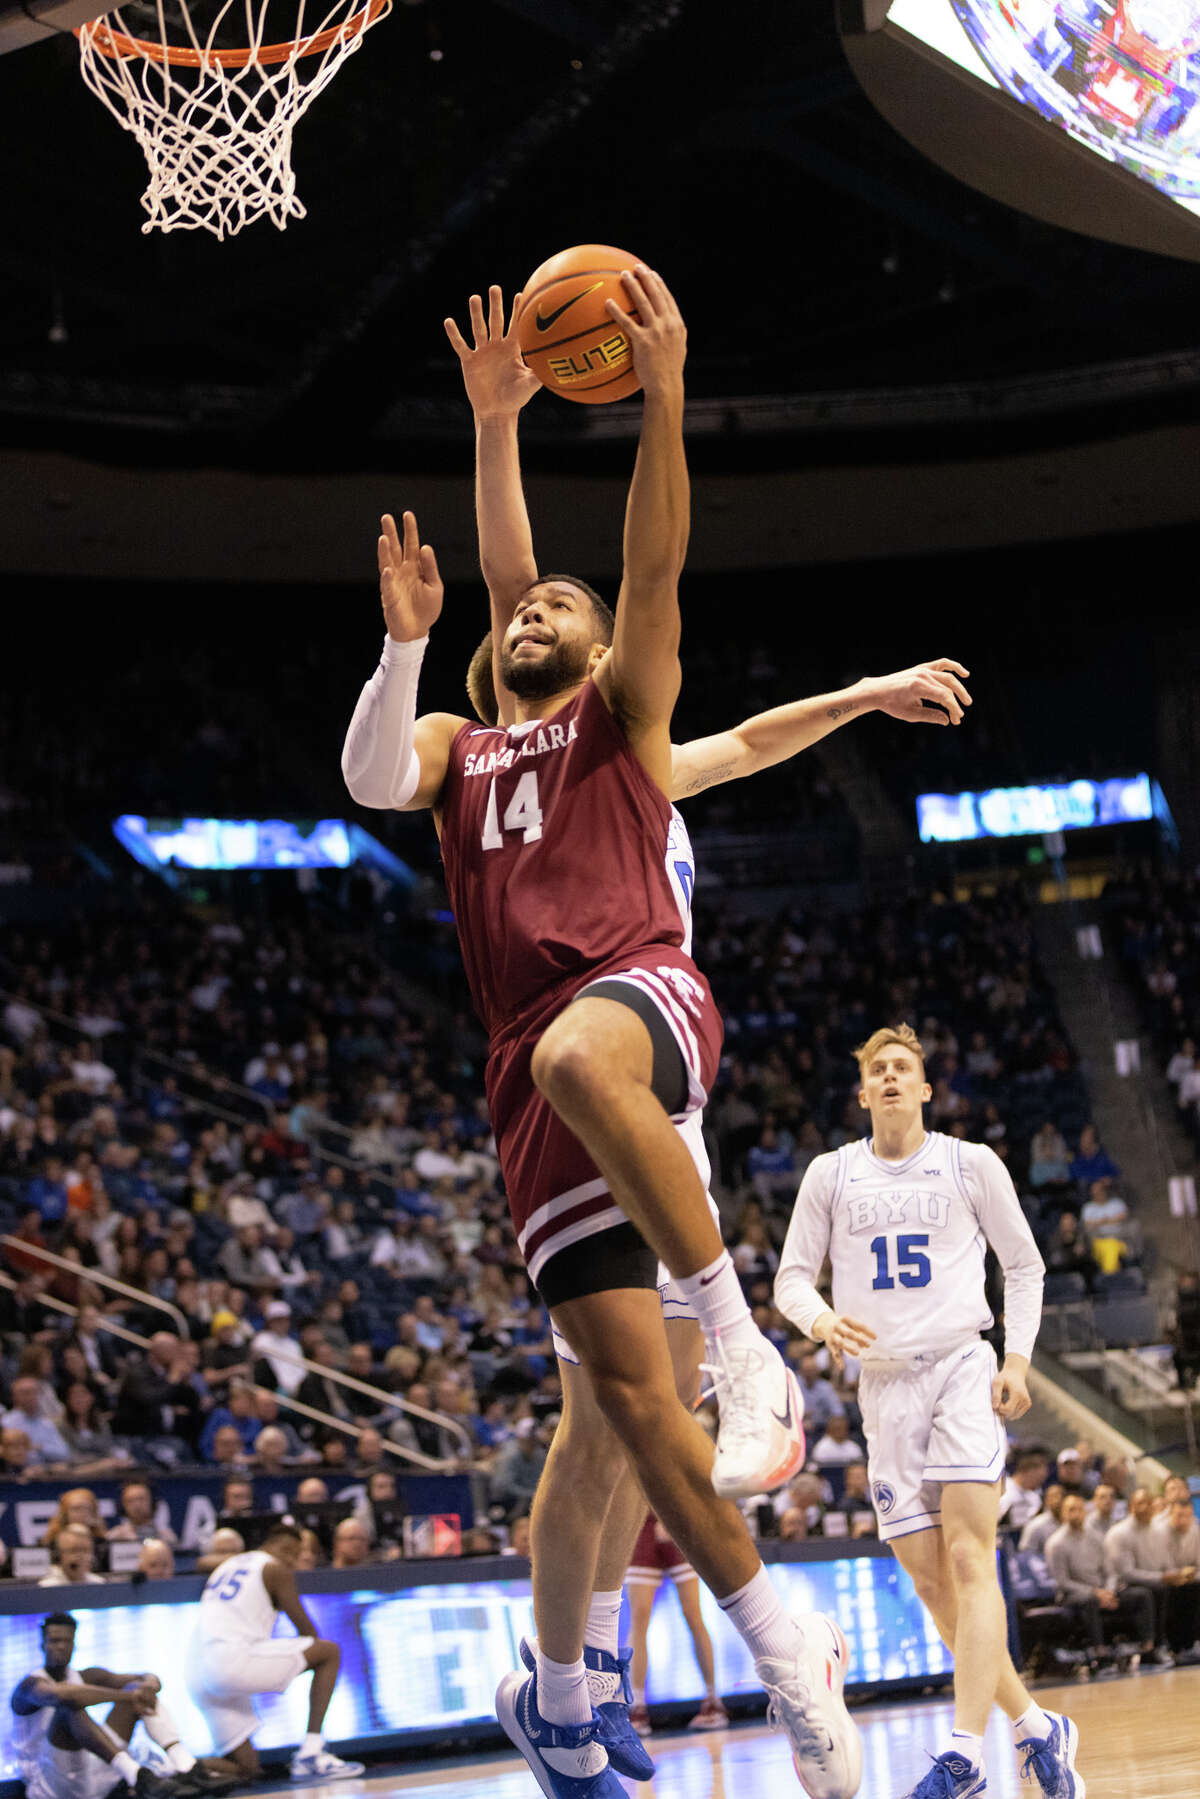 Santa Clara’s Keshawn Justice goes up for a shot during a game against BYU on Thursday, Feb. 16, 2023